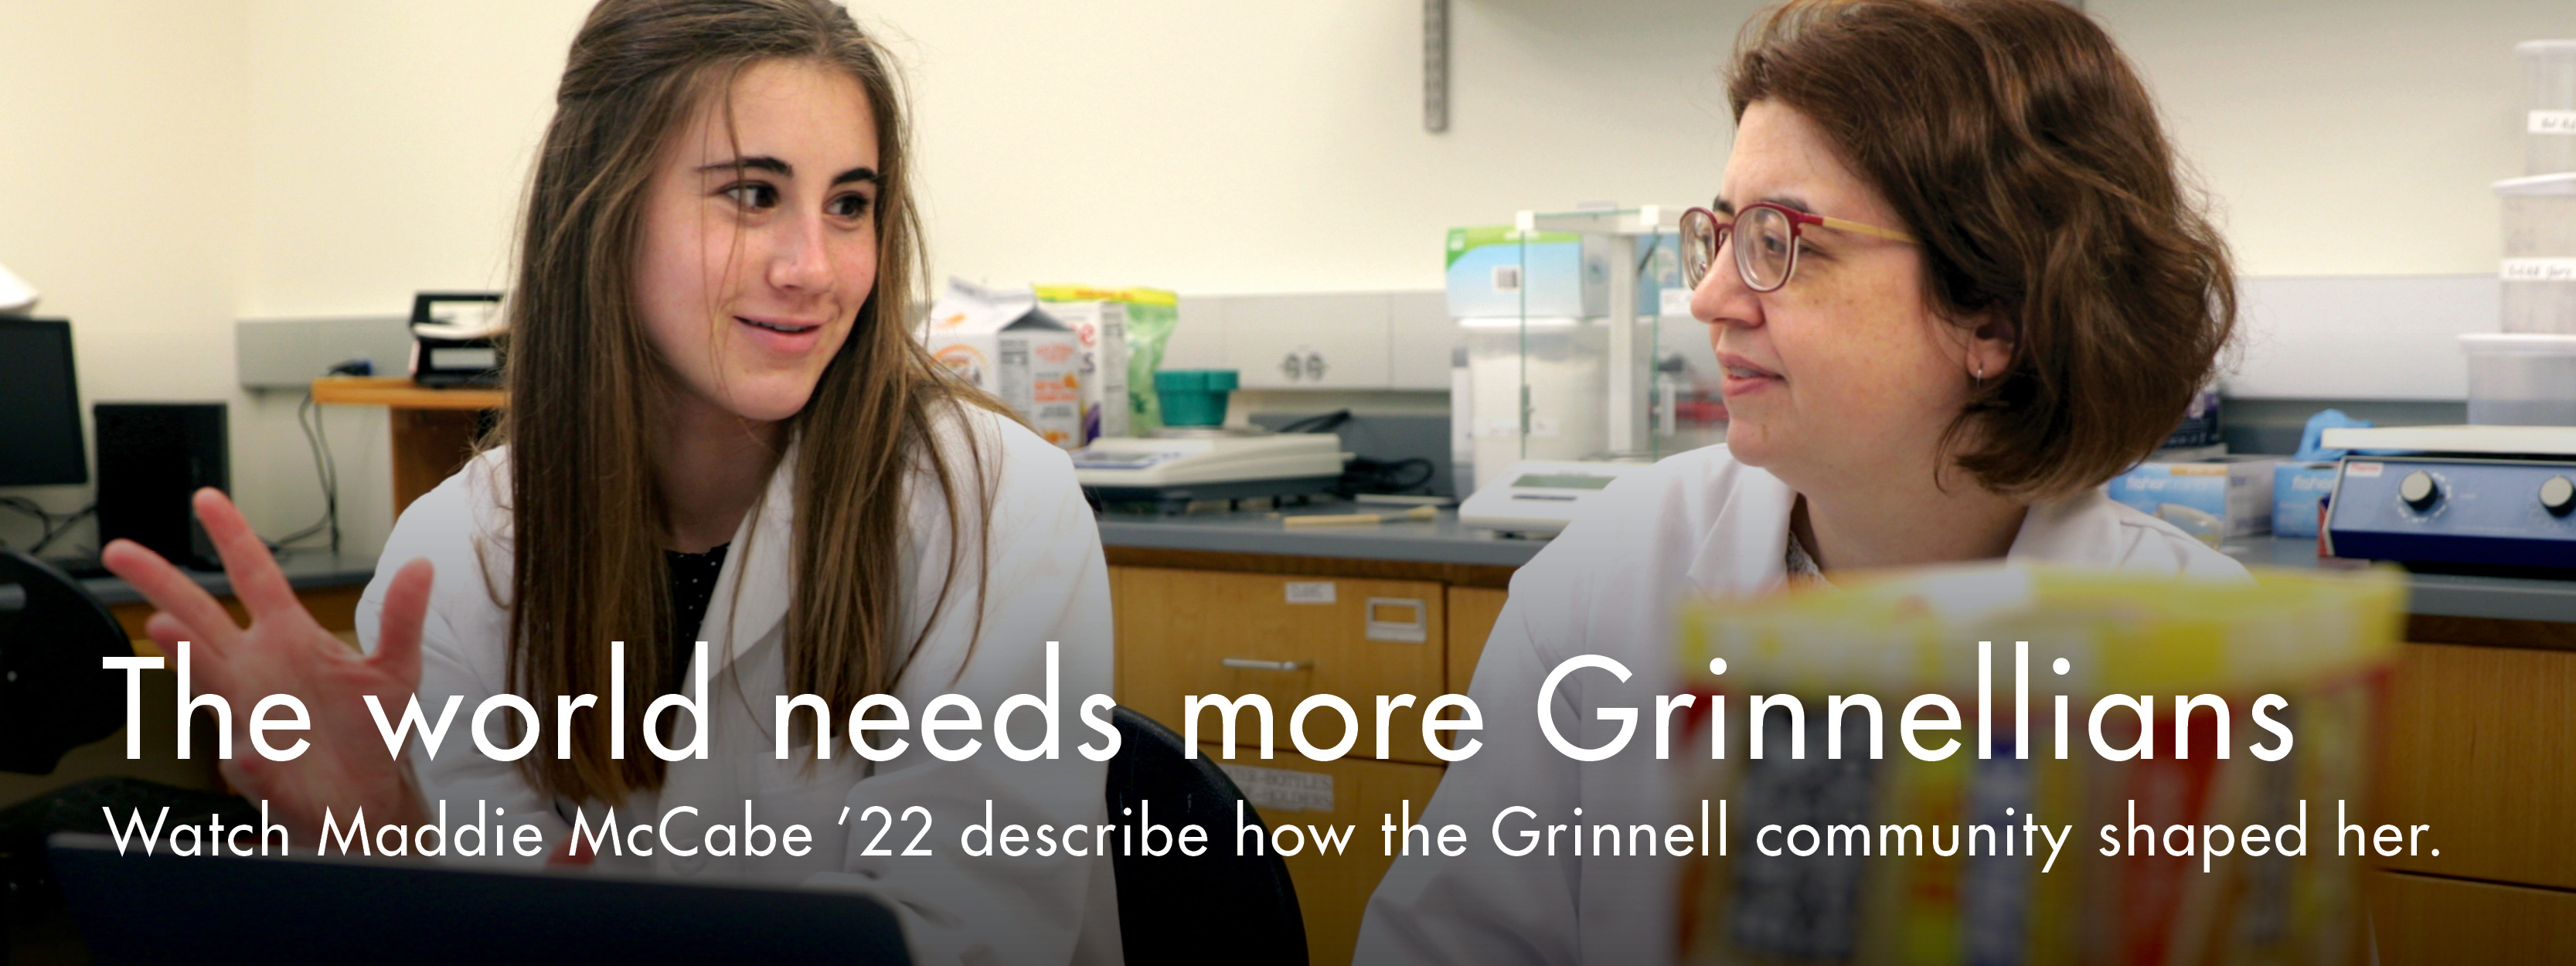 Maddie McCabe with her science professor. Text: The world needs more Grinnellians. Watch Maddie McCabe '22 describe how the Grinnell Community shaped her. 